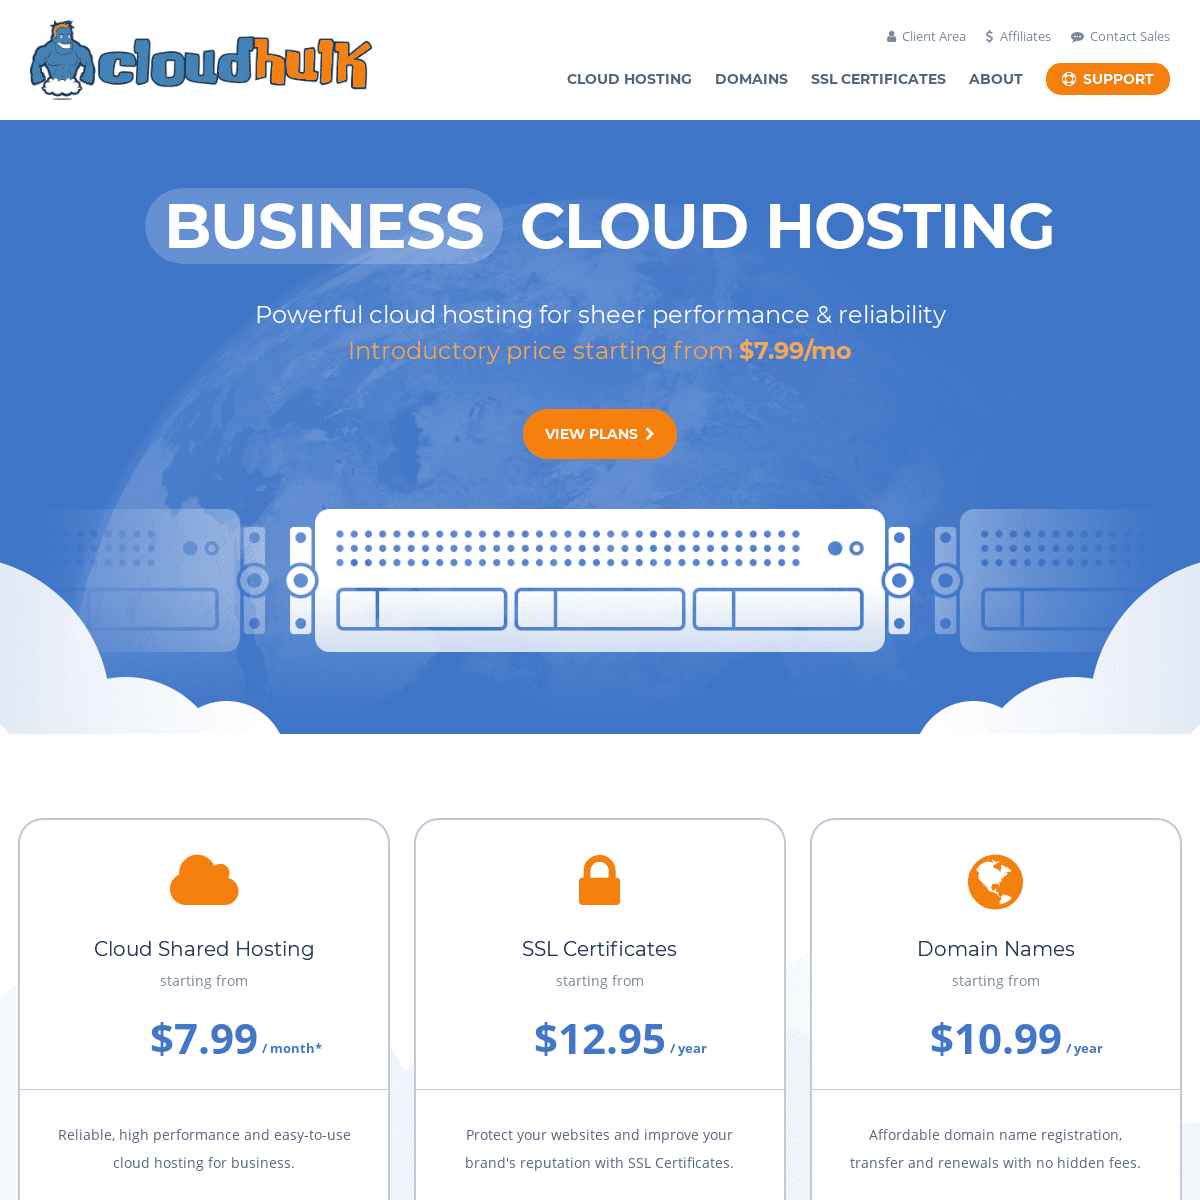 A complete backup of cloudhulk.com